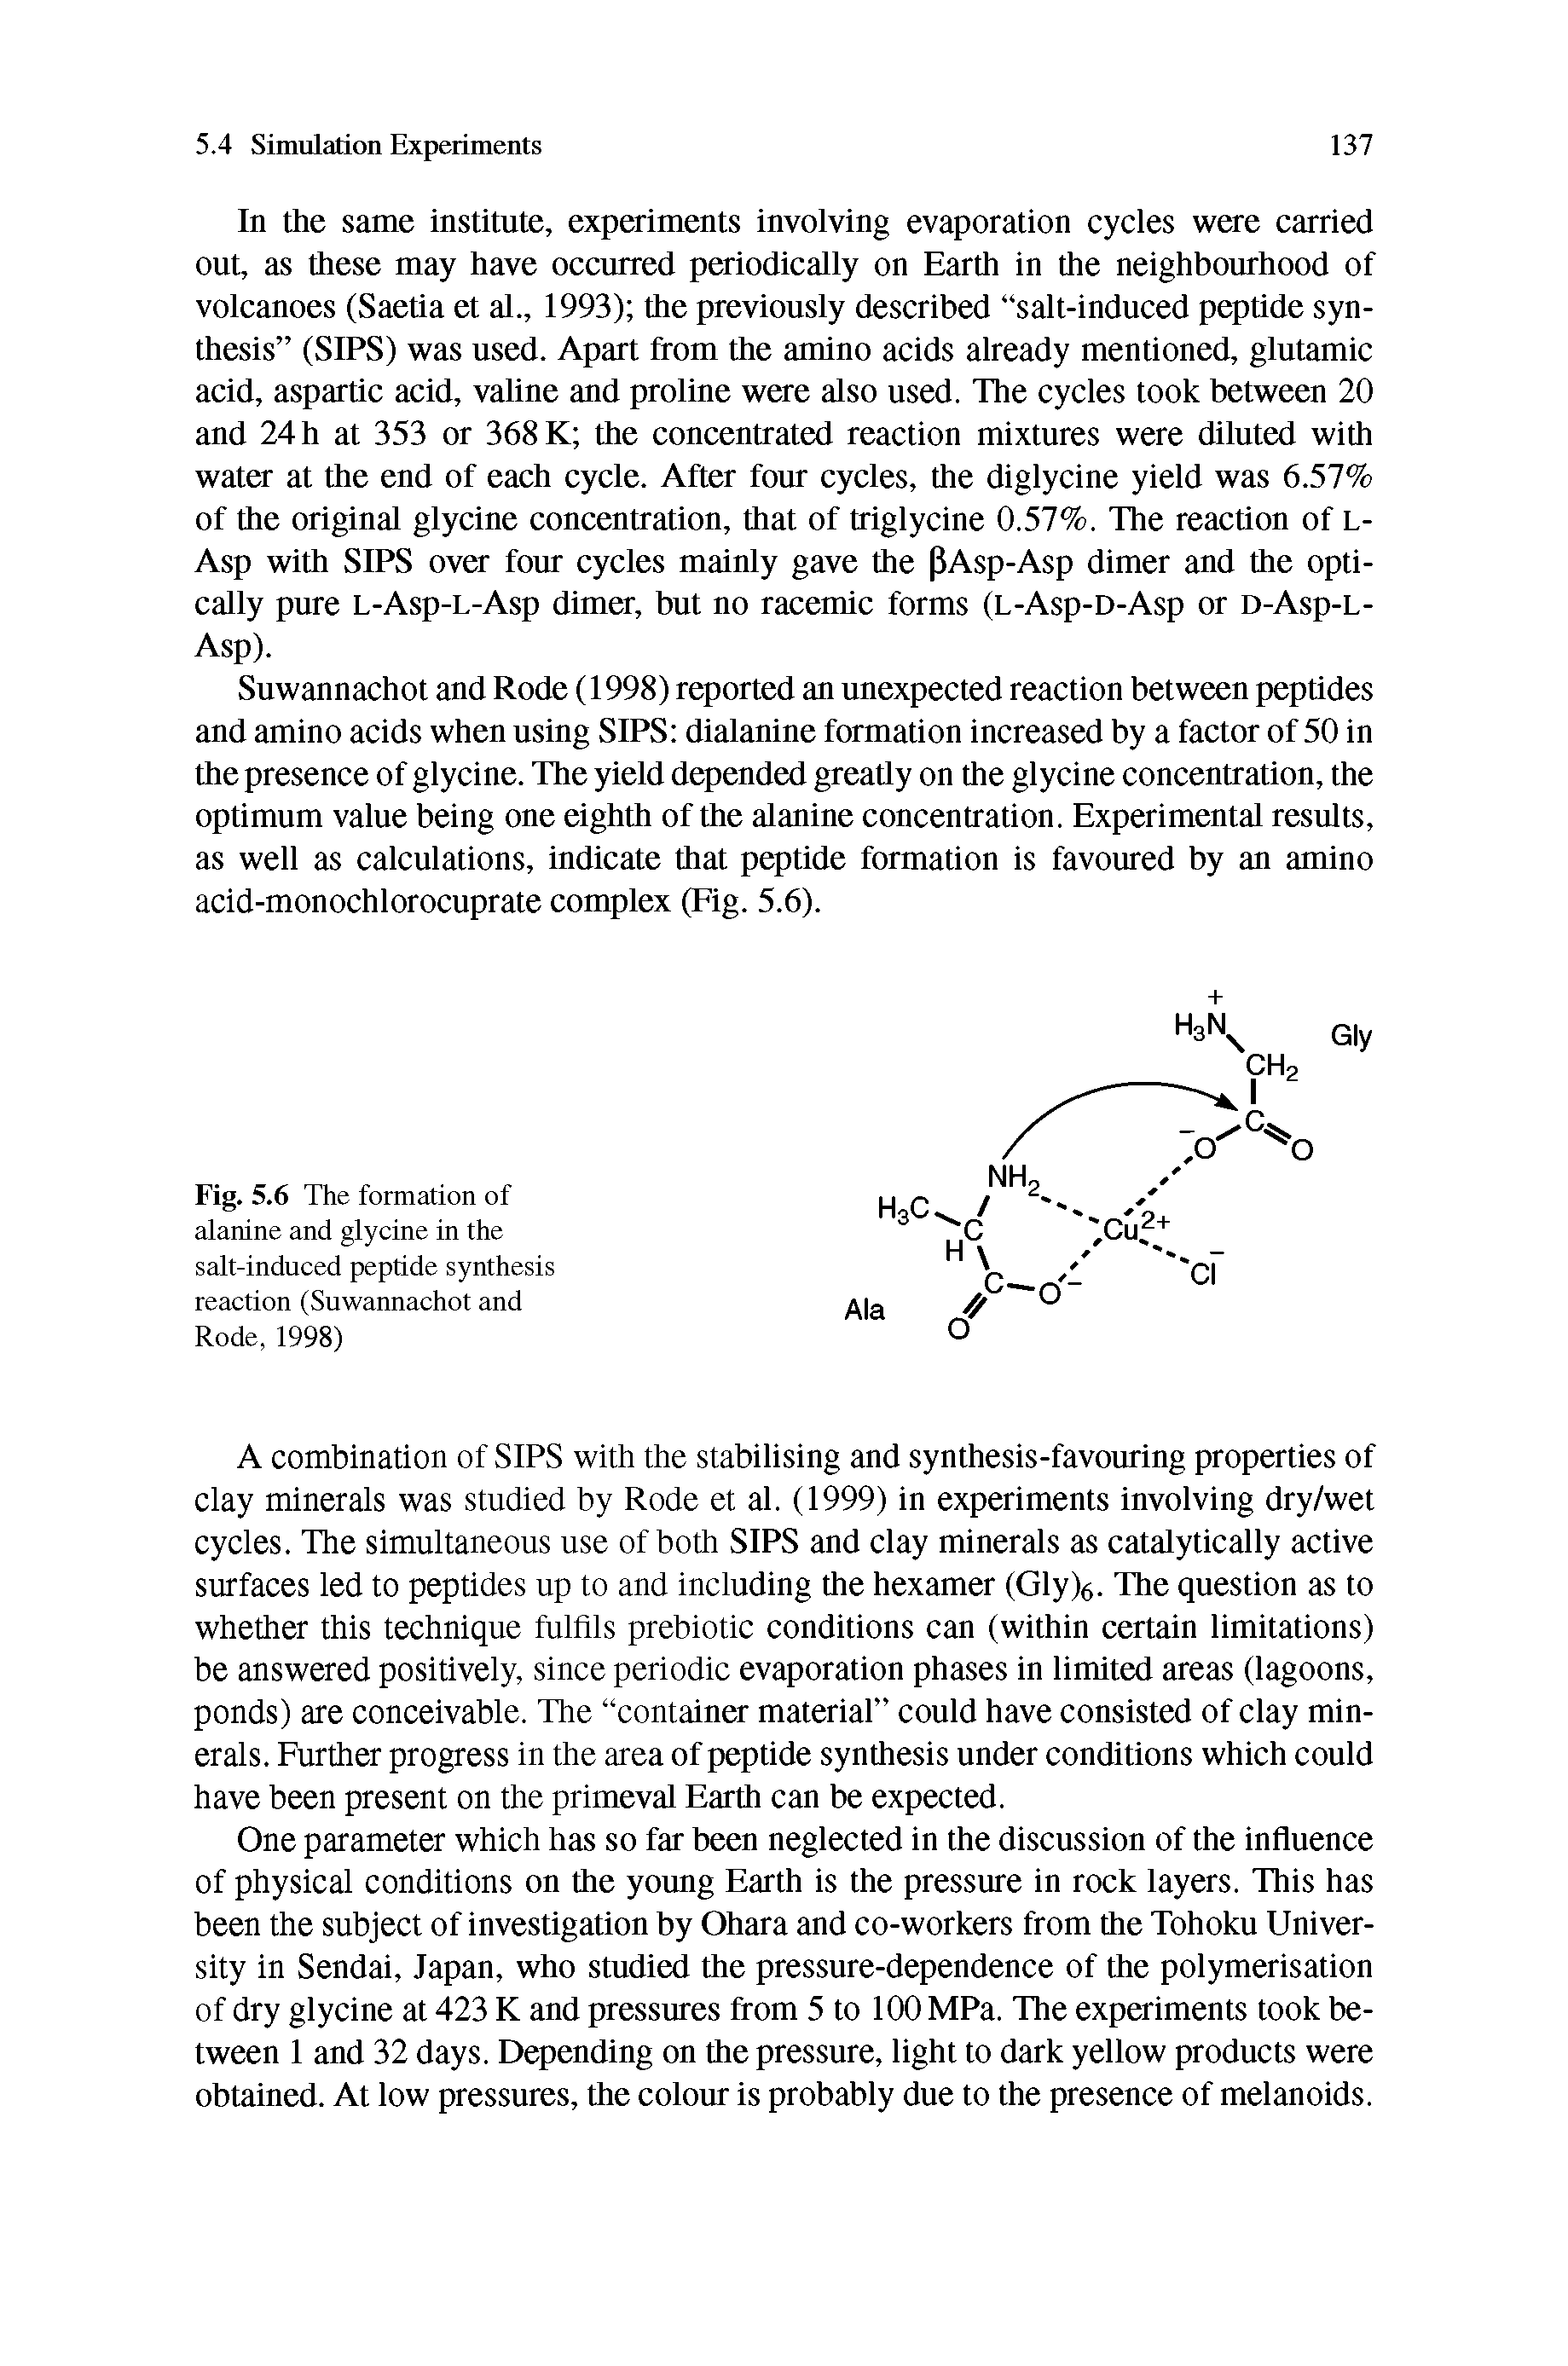 Fig. 5.6 The formation of alanine and glycine in the salt-induced peptide synthesis reaction (Suwannachot and Rode, 1998)...